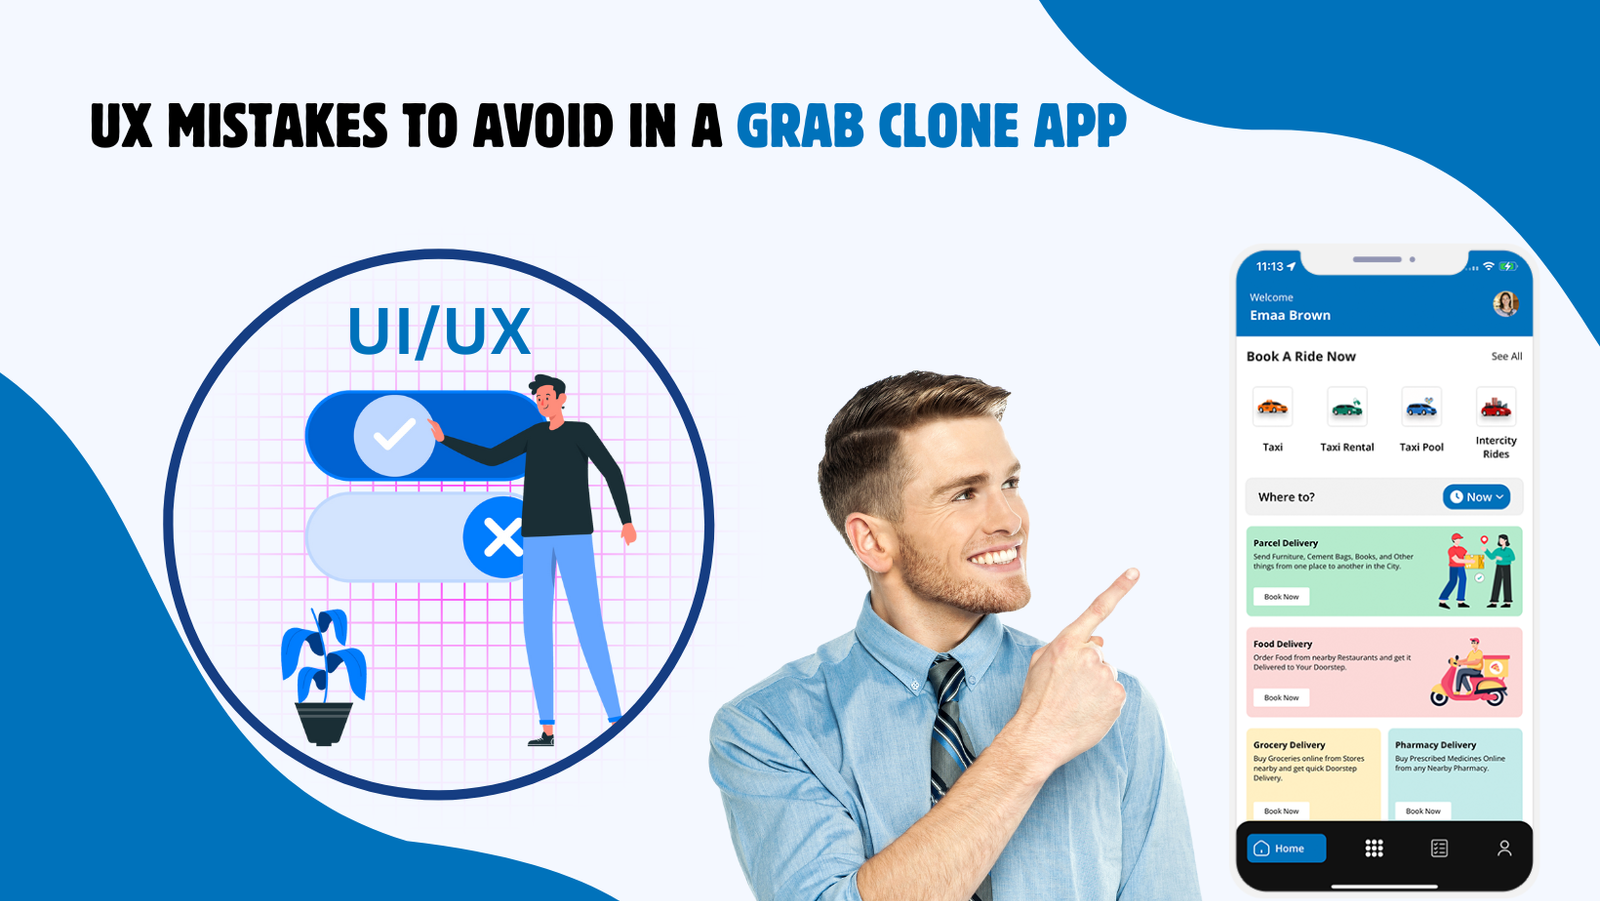 Top UX Mistakes to Avoid in a Grab Clone App